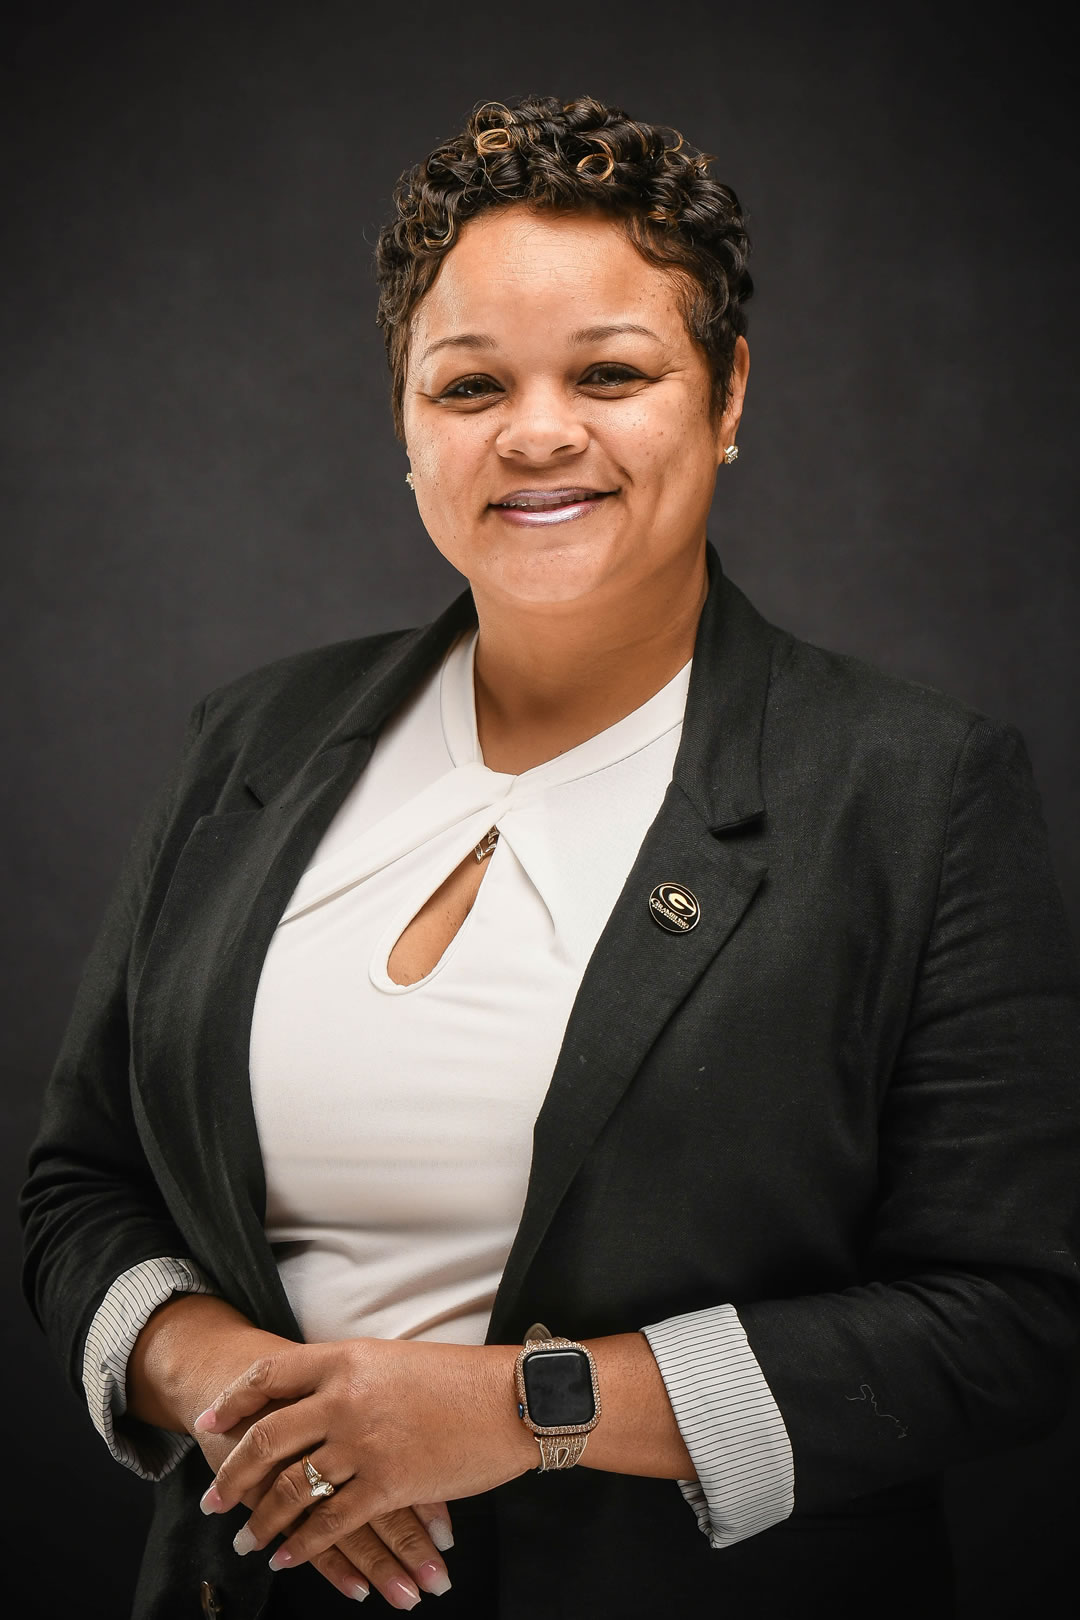 Dr. Shalena Johnson, Director of Institutional Research